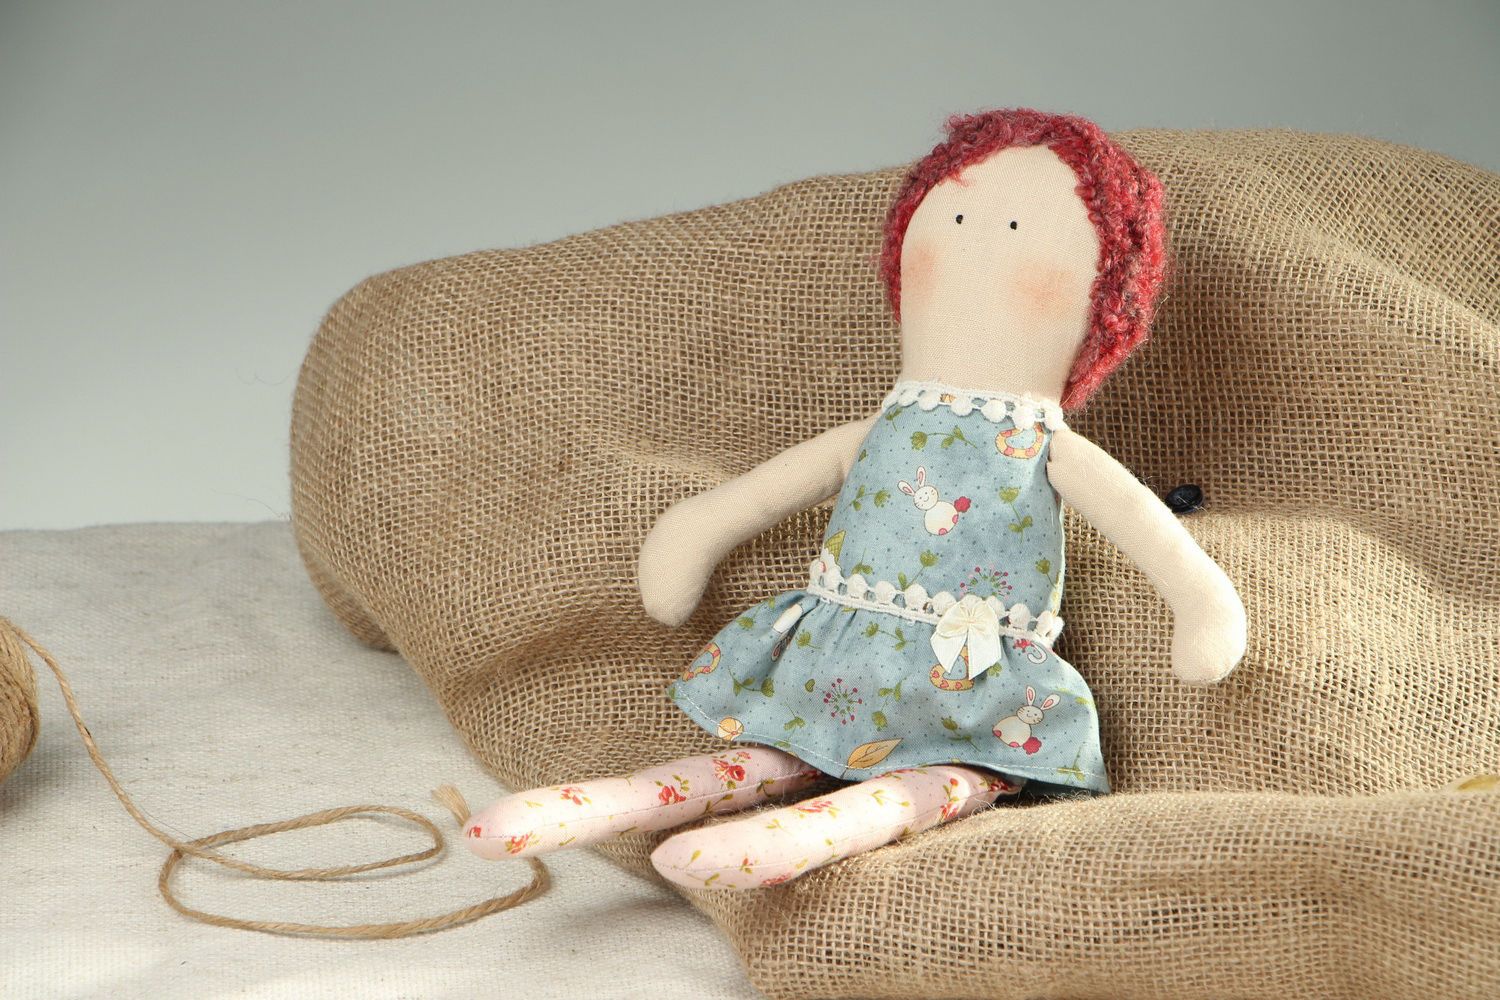 Interior doll with red curls photo 1